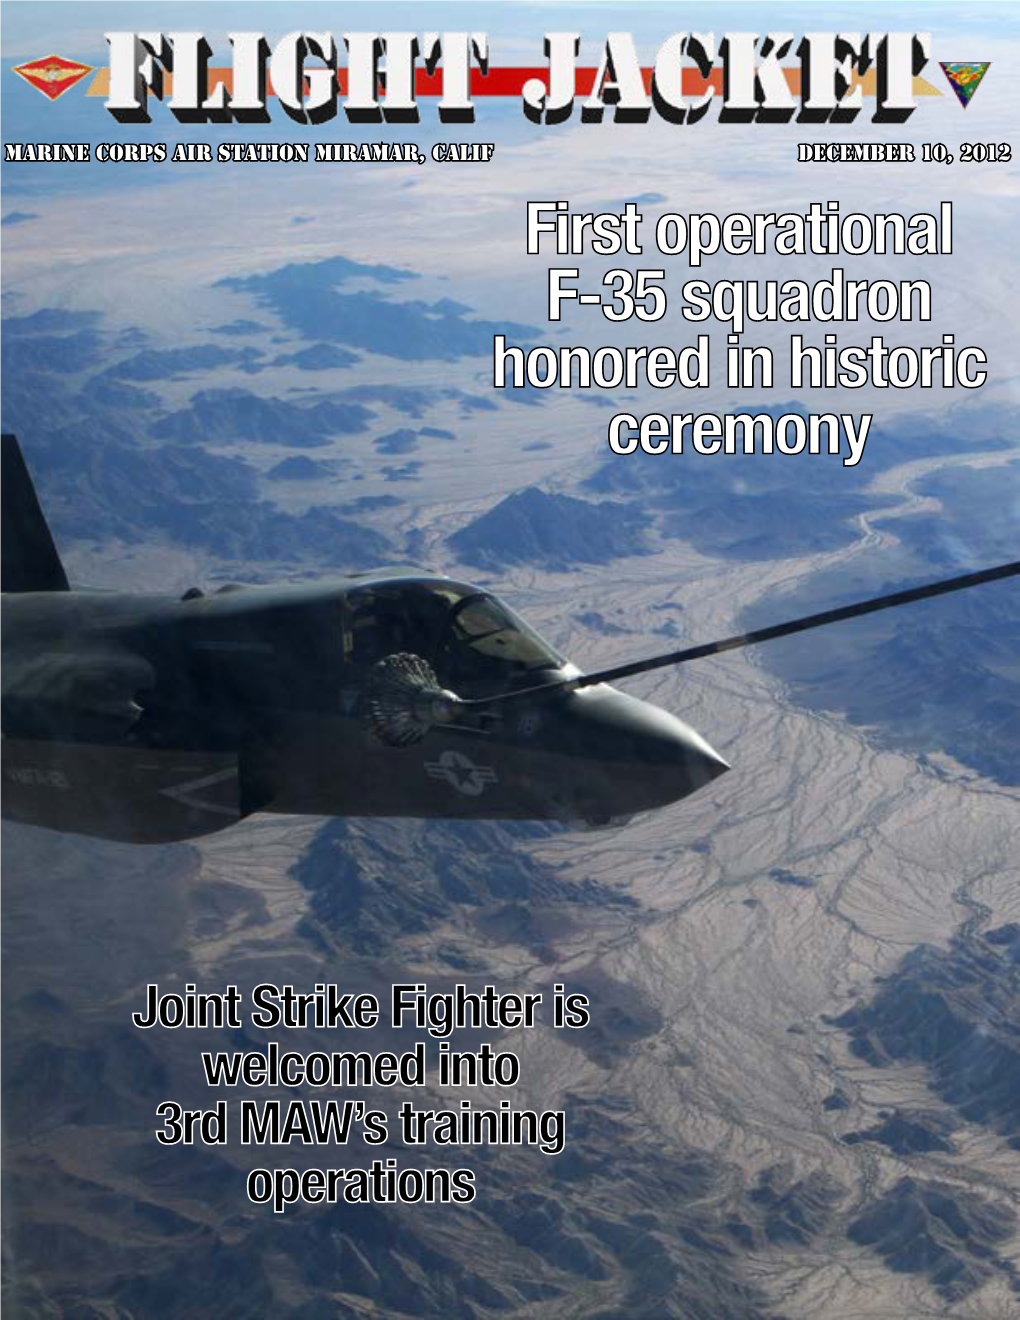 First Operational F-35 Squadron Honored in Historic Ceremony